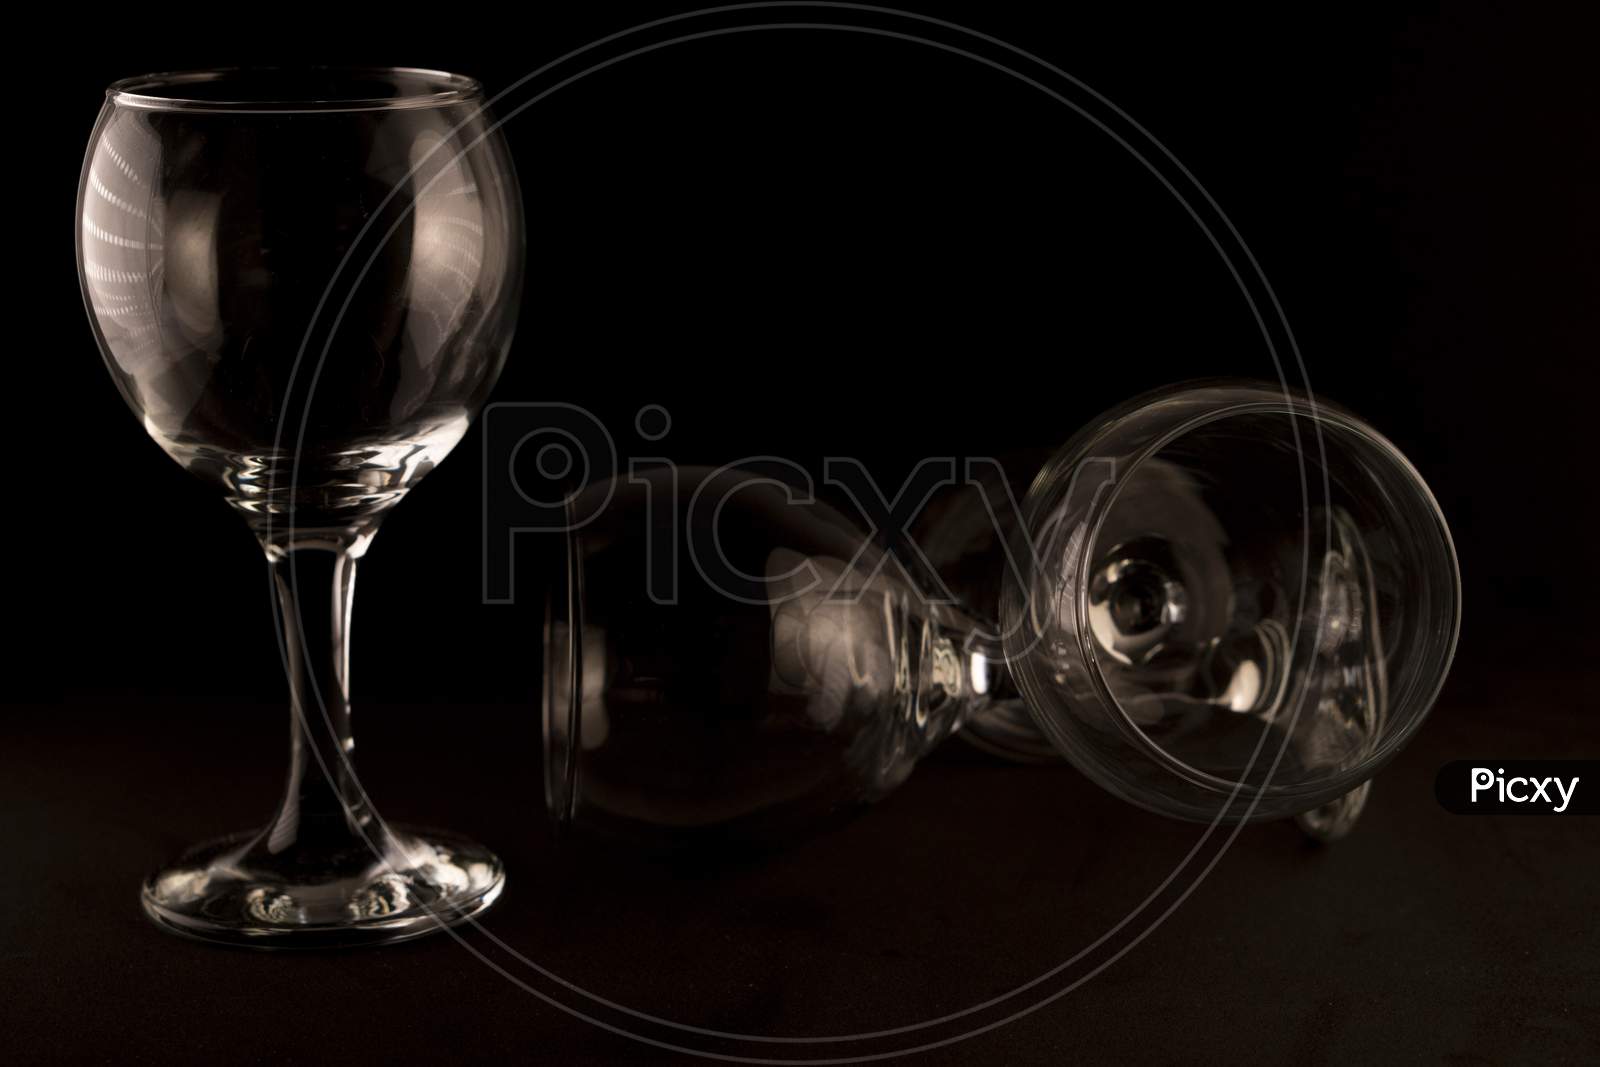 picture of empty wine glasses against a black background.